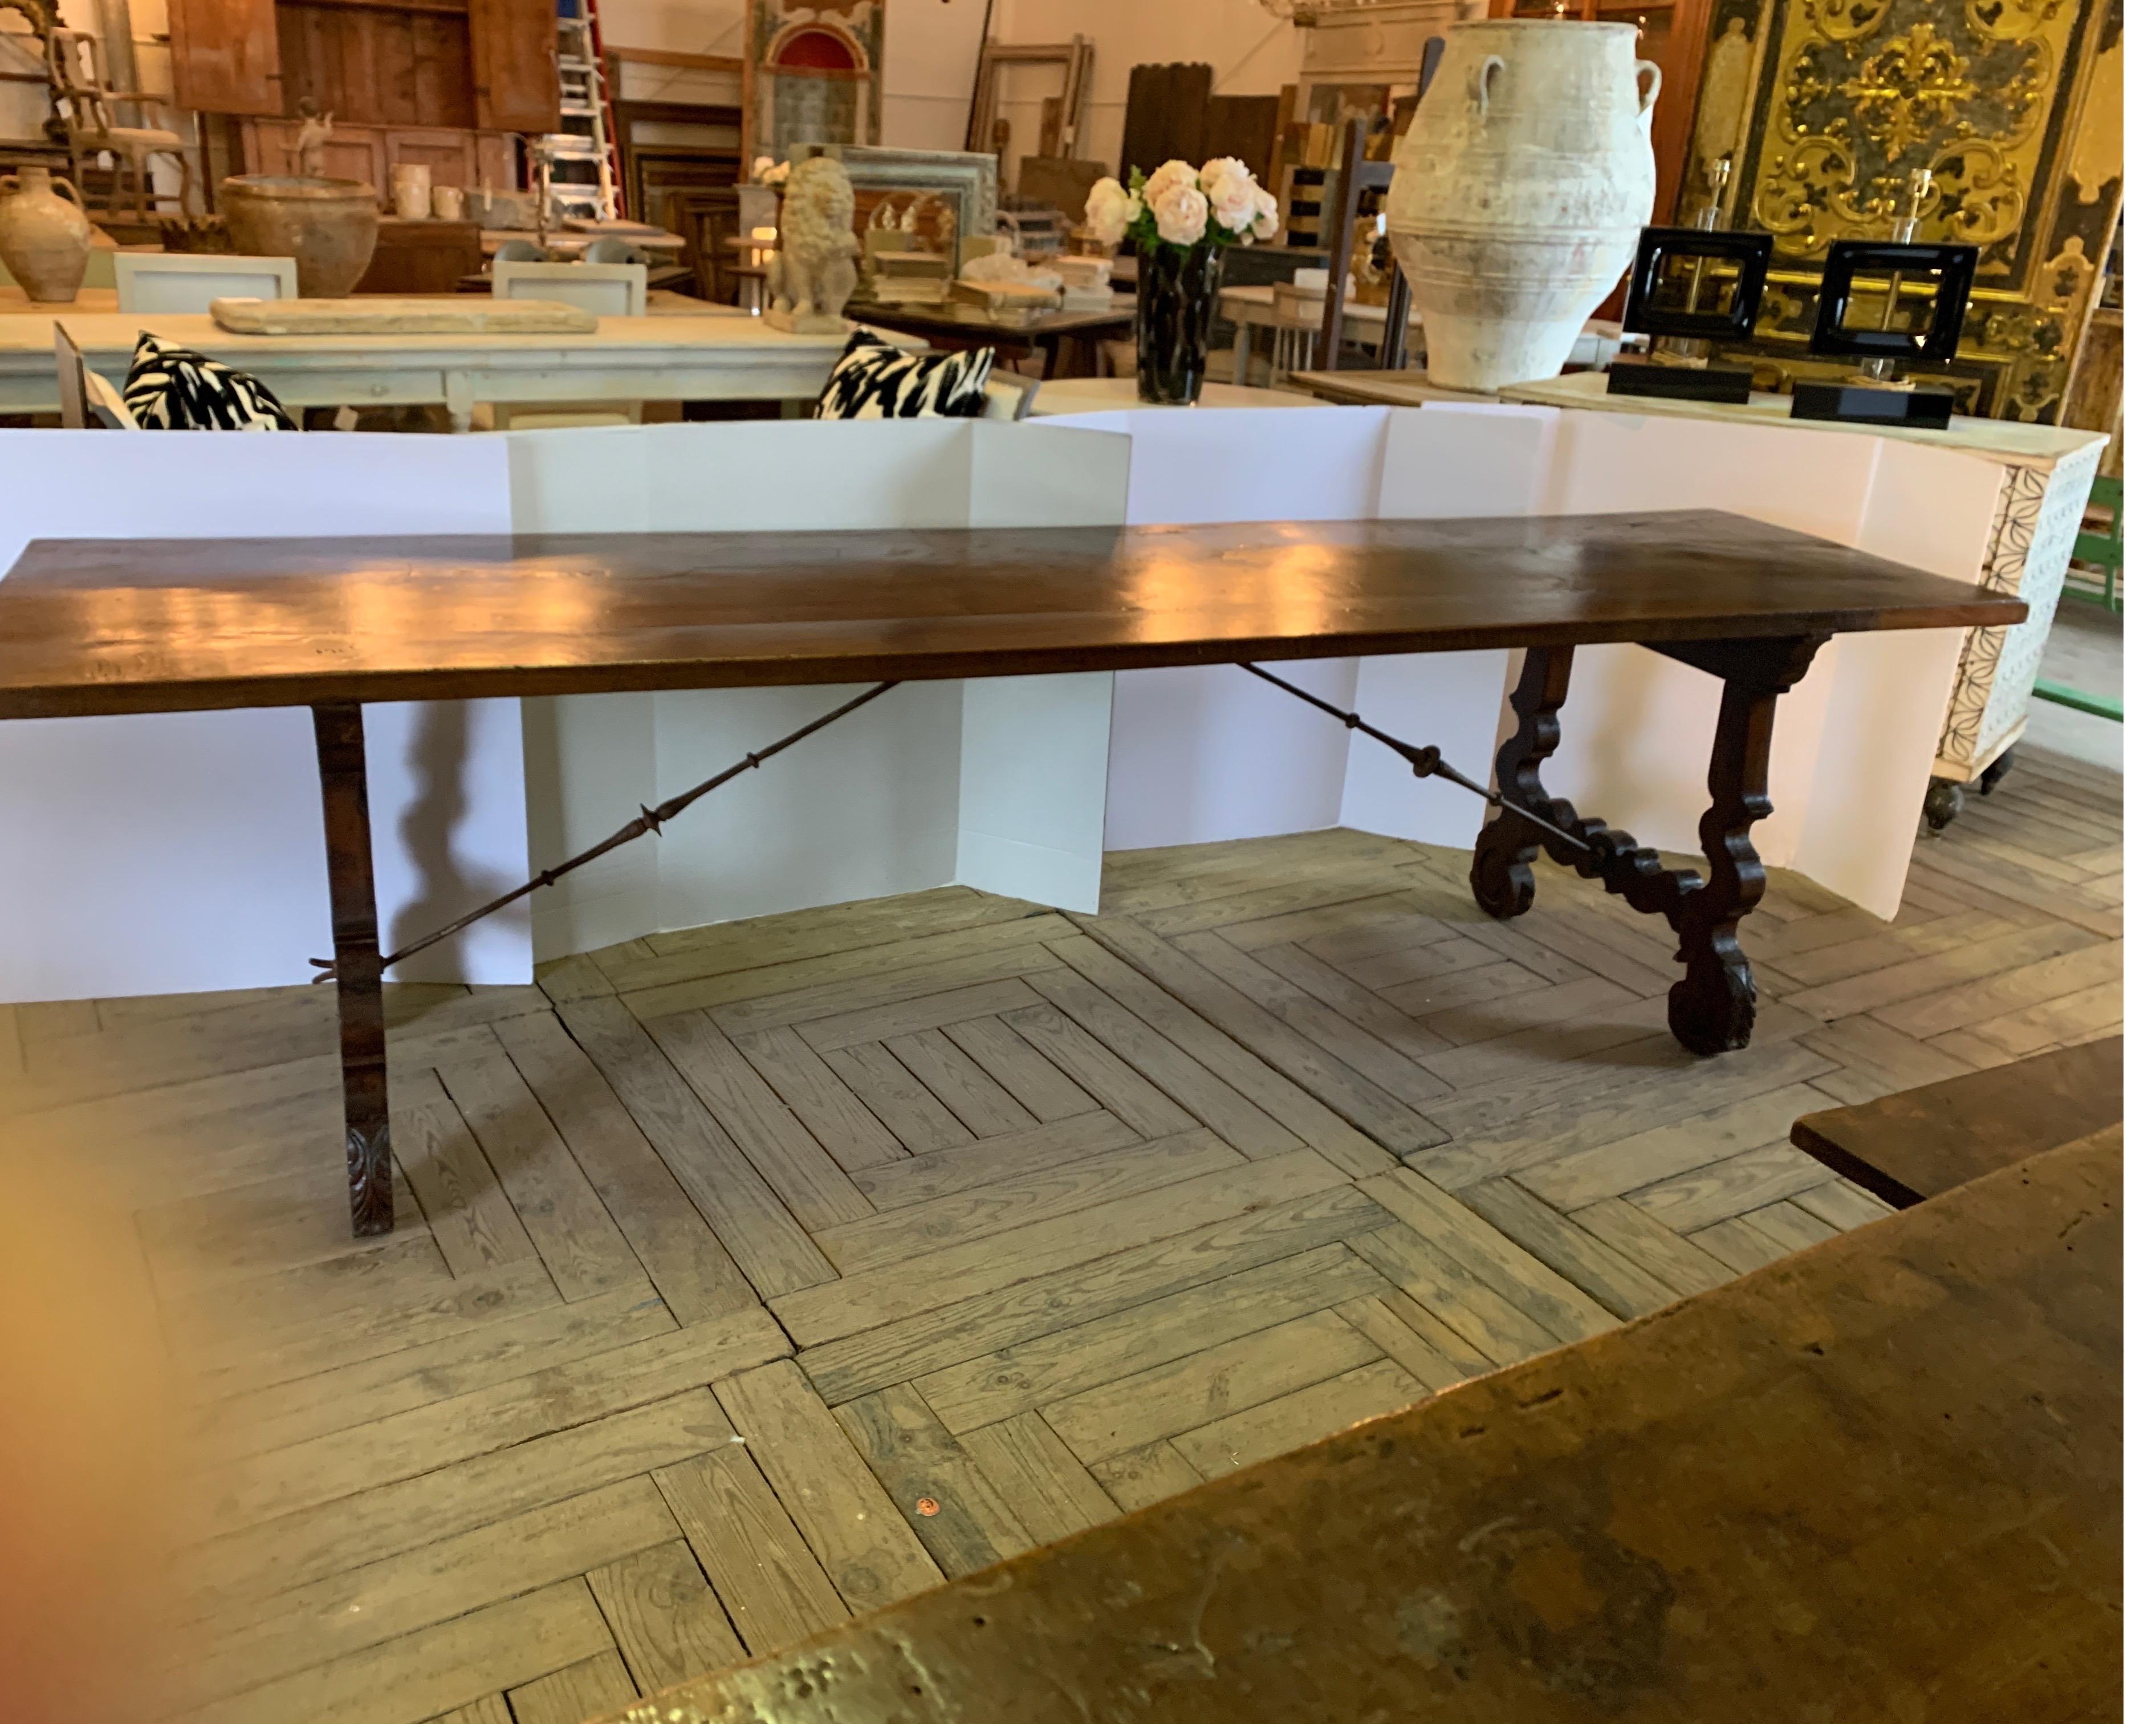 19th Century Walnut Dining Table With Iron Stretcher From Spain That Seats 10  11